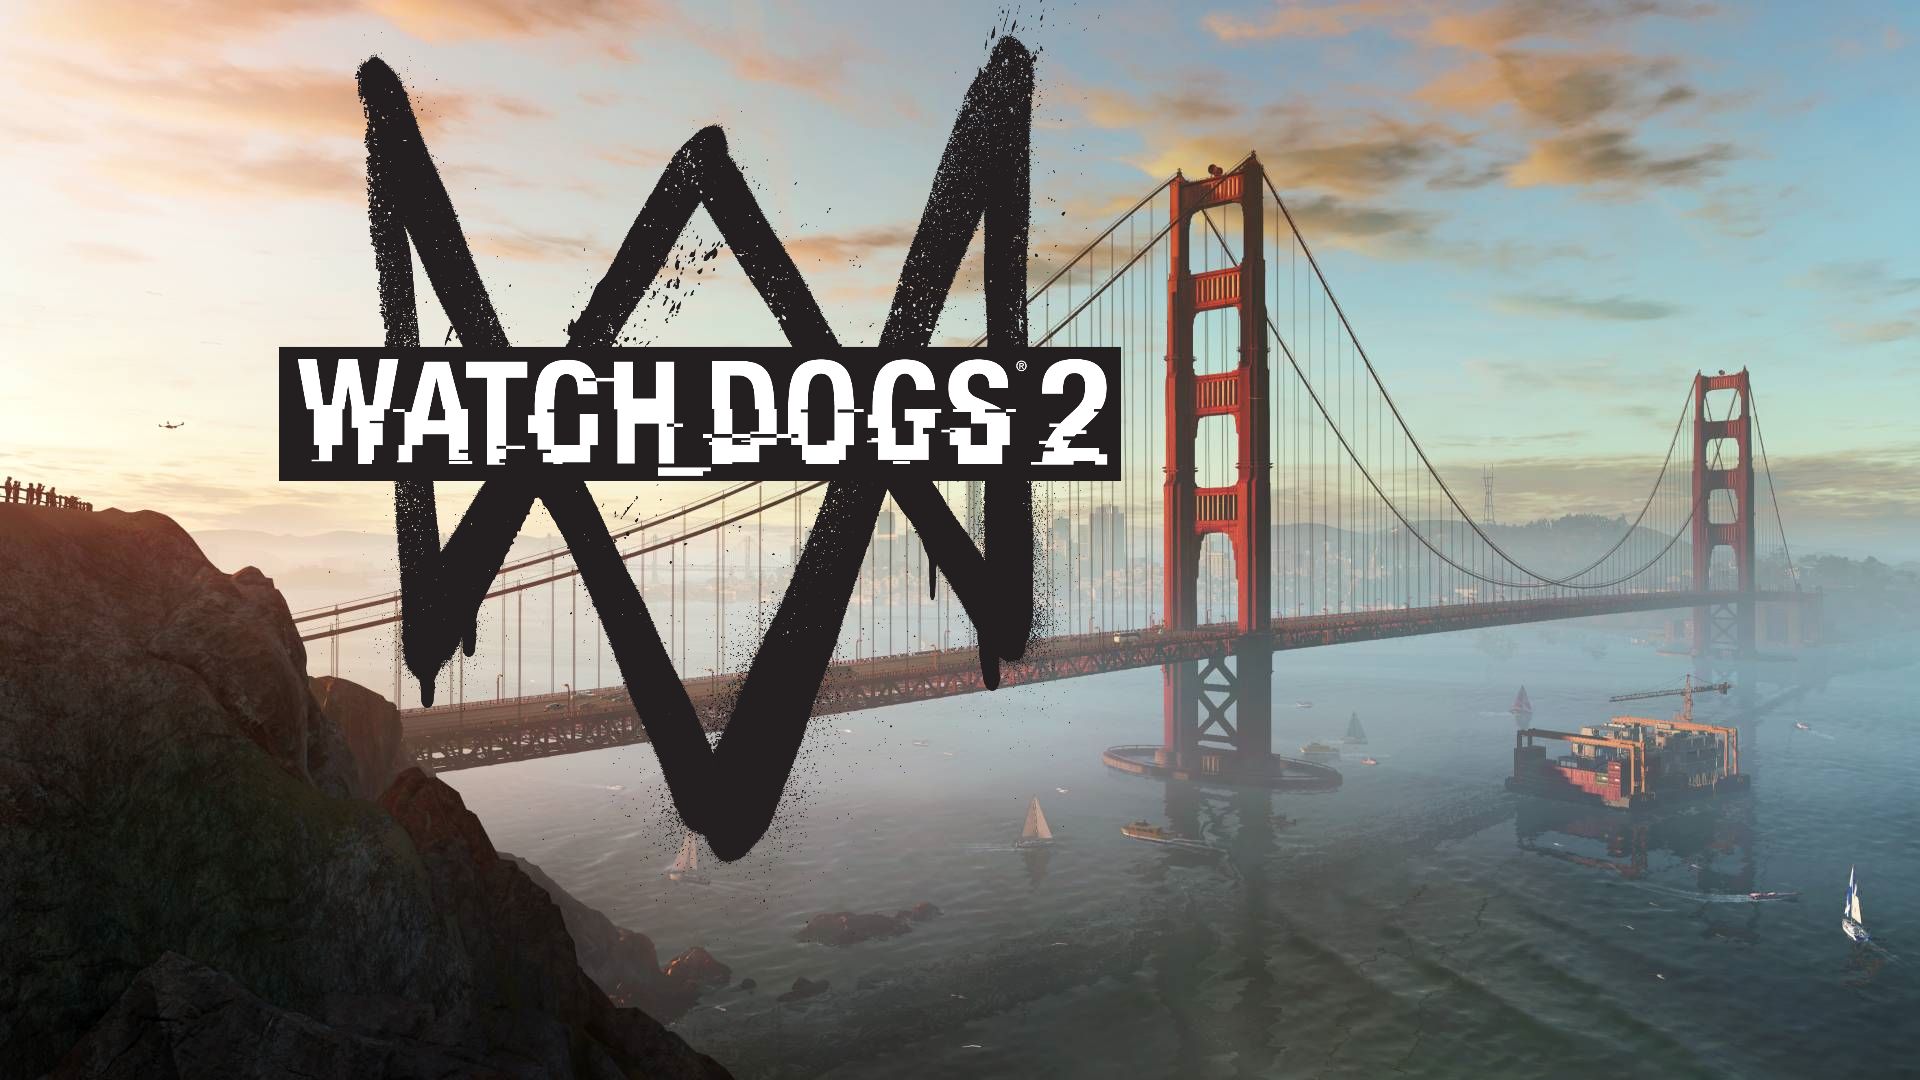 watch dogs 2, video game, watch dogs